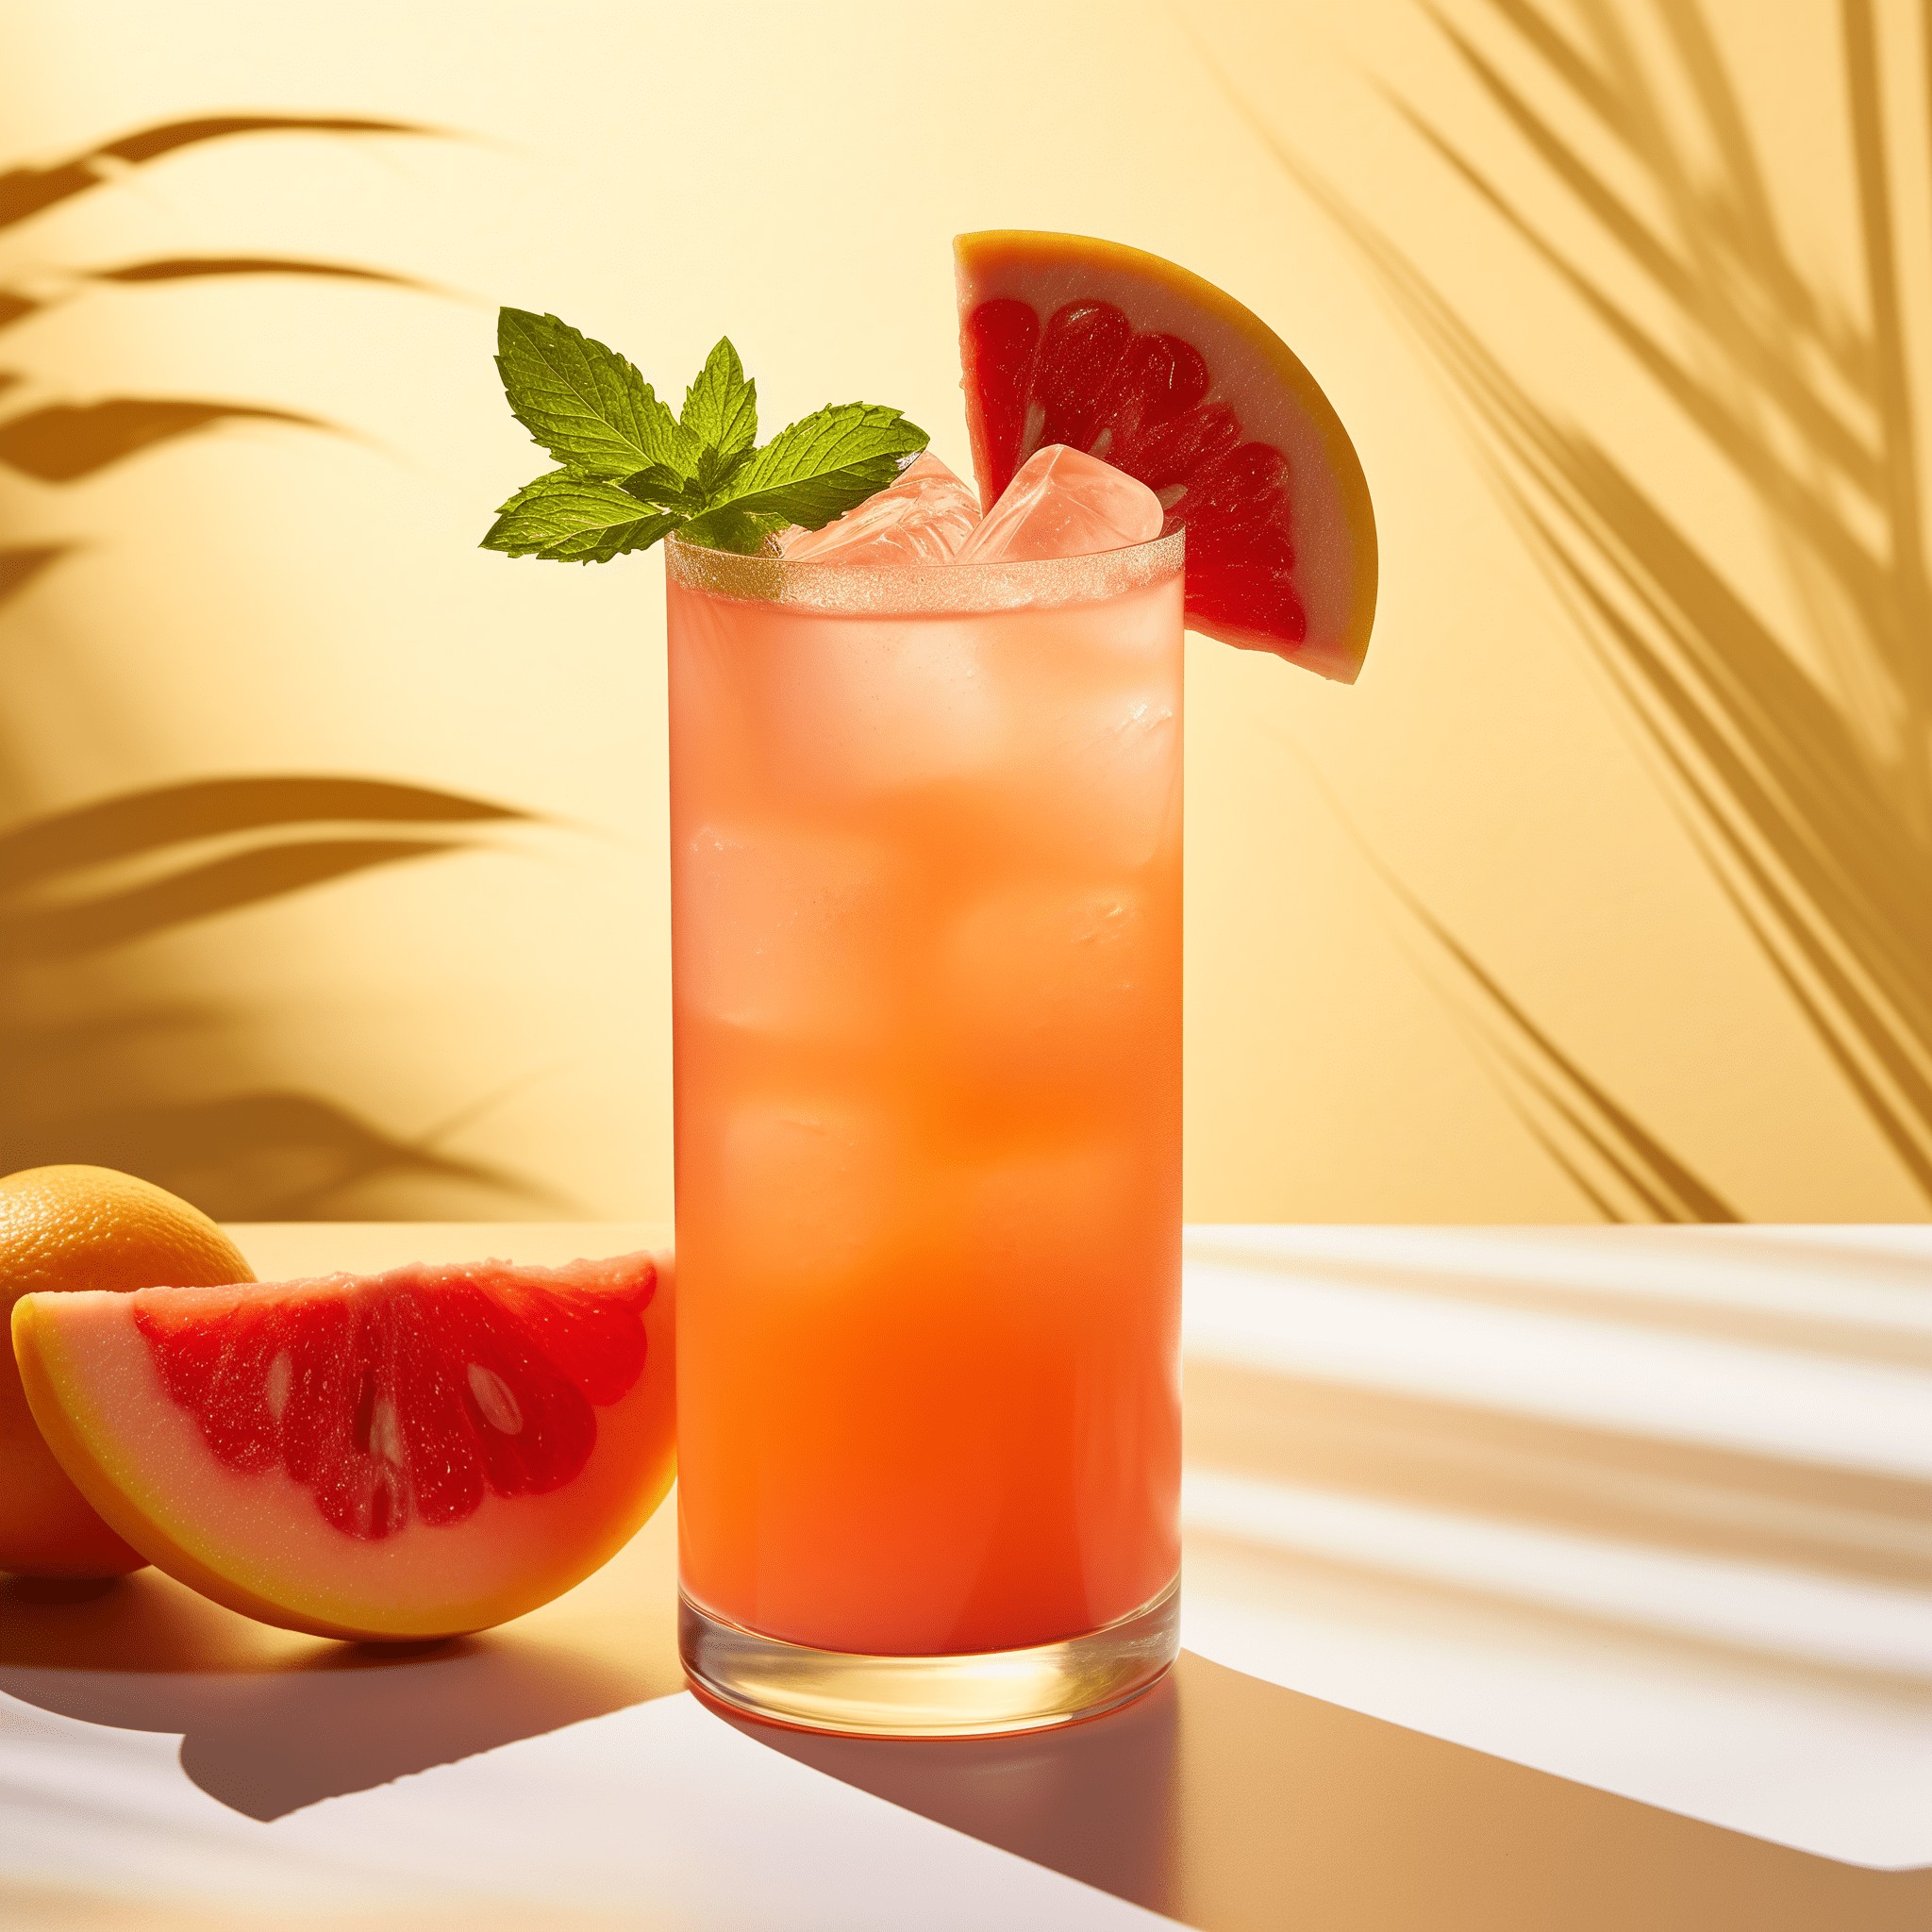 Fuzz Ball Cocktail Recipe - The Fuzz Ball cocktail is a sweet, fruity delight with a luscious peachy aroma complemented by the refreshing taste of watermelon. It's a light and playful drink with a subtle kick that doesn't overpower the palate.